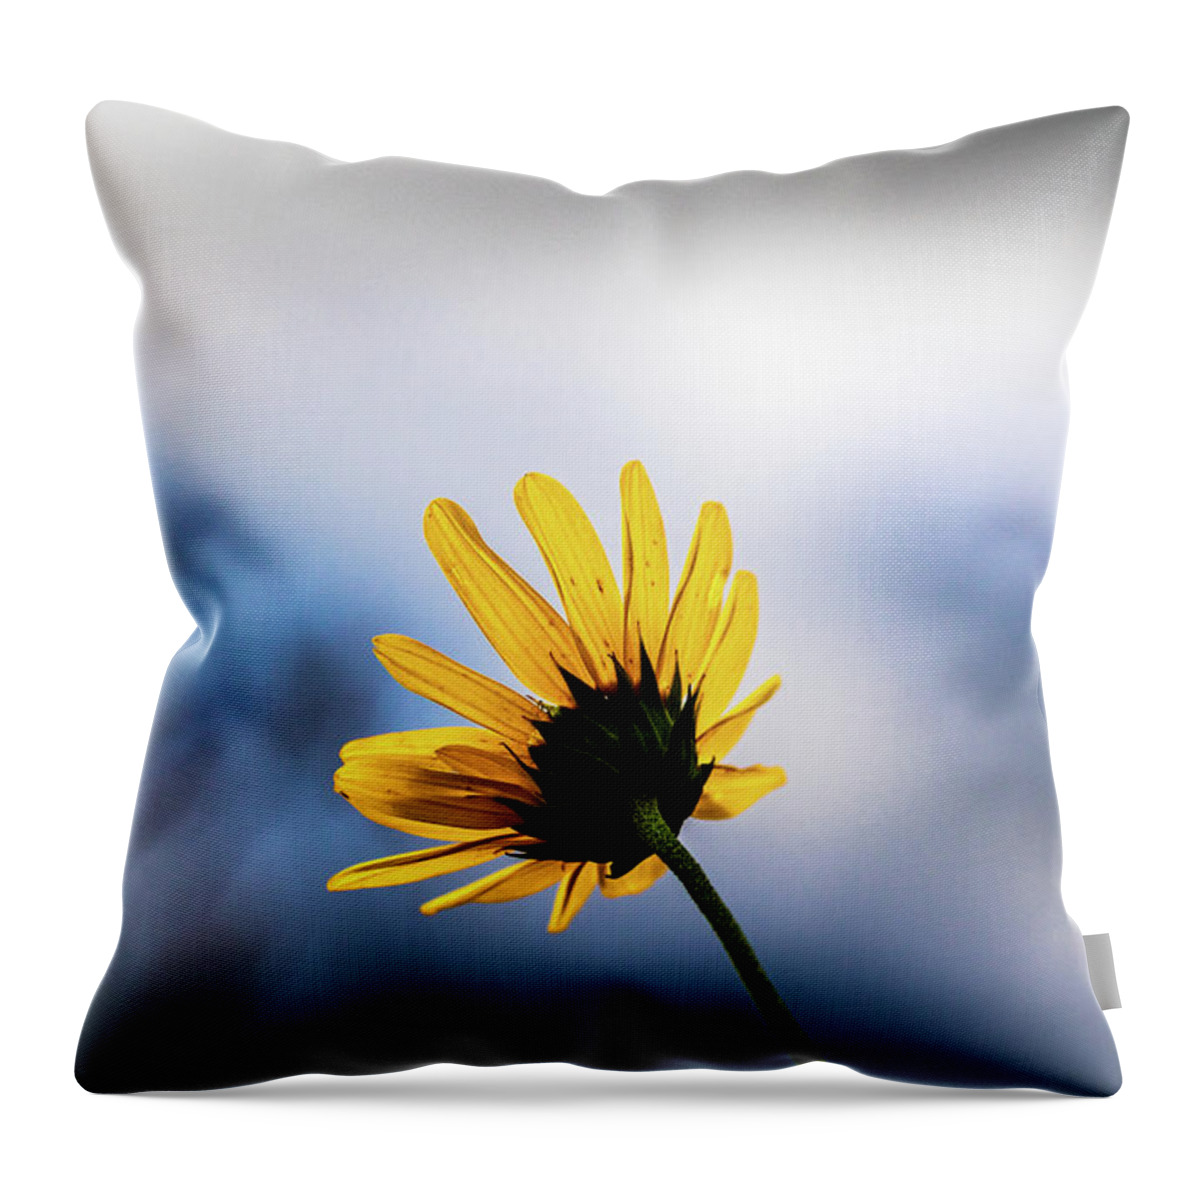 Jay Stockhaus Throw Pillow featuring the photograph Wild Sunflower #2 by Jay Stockhaus